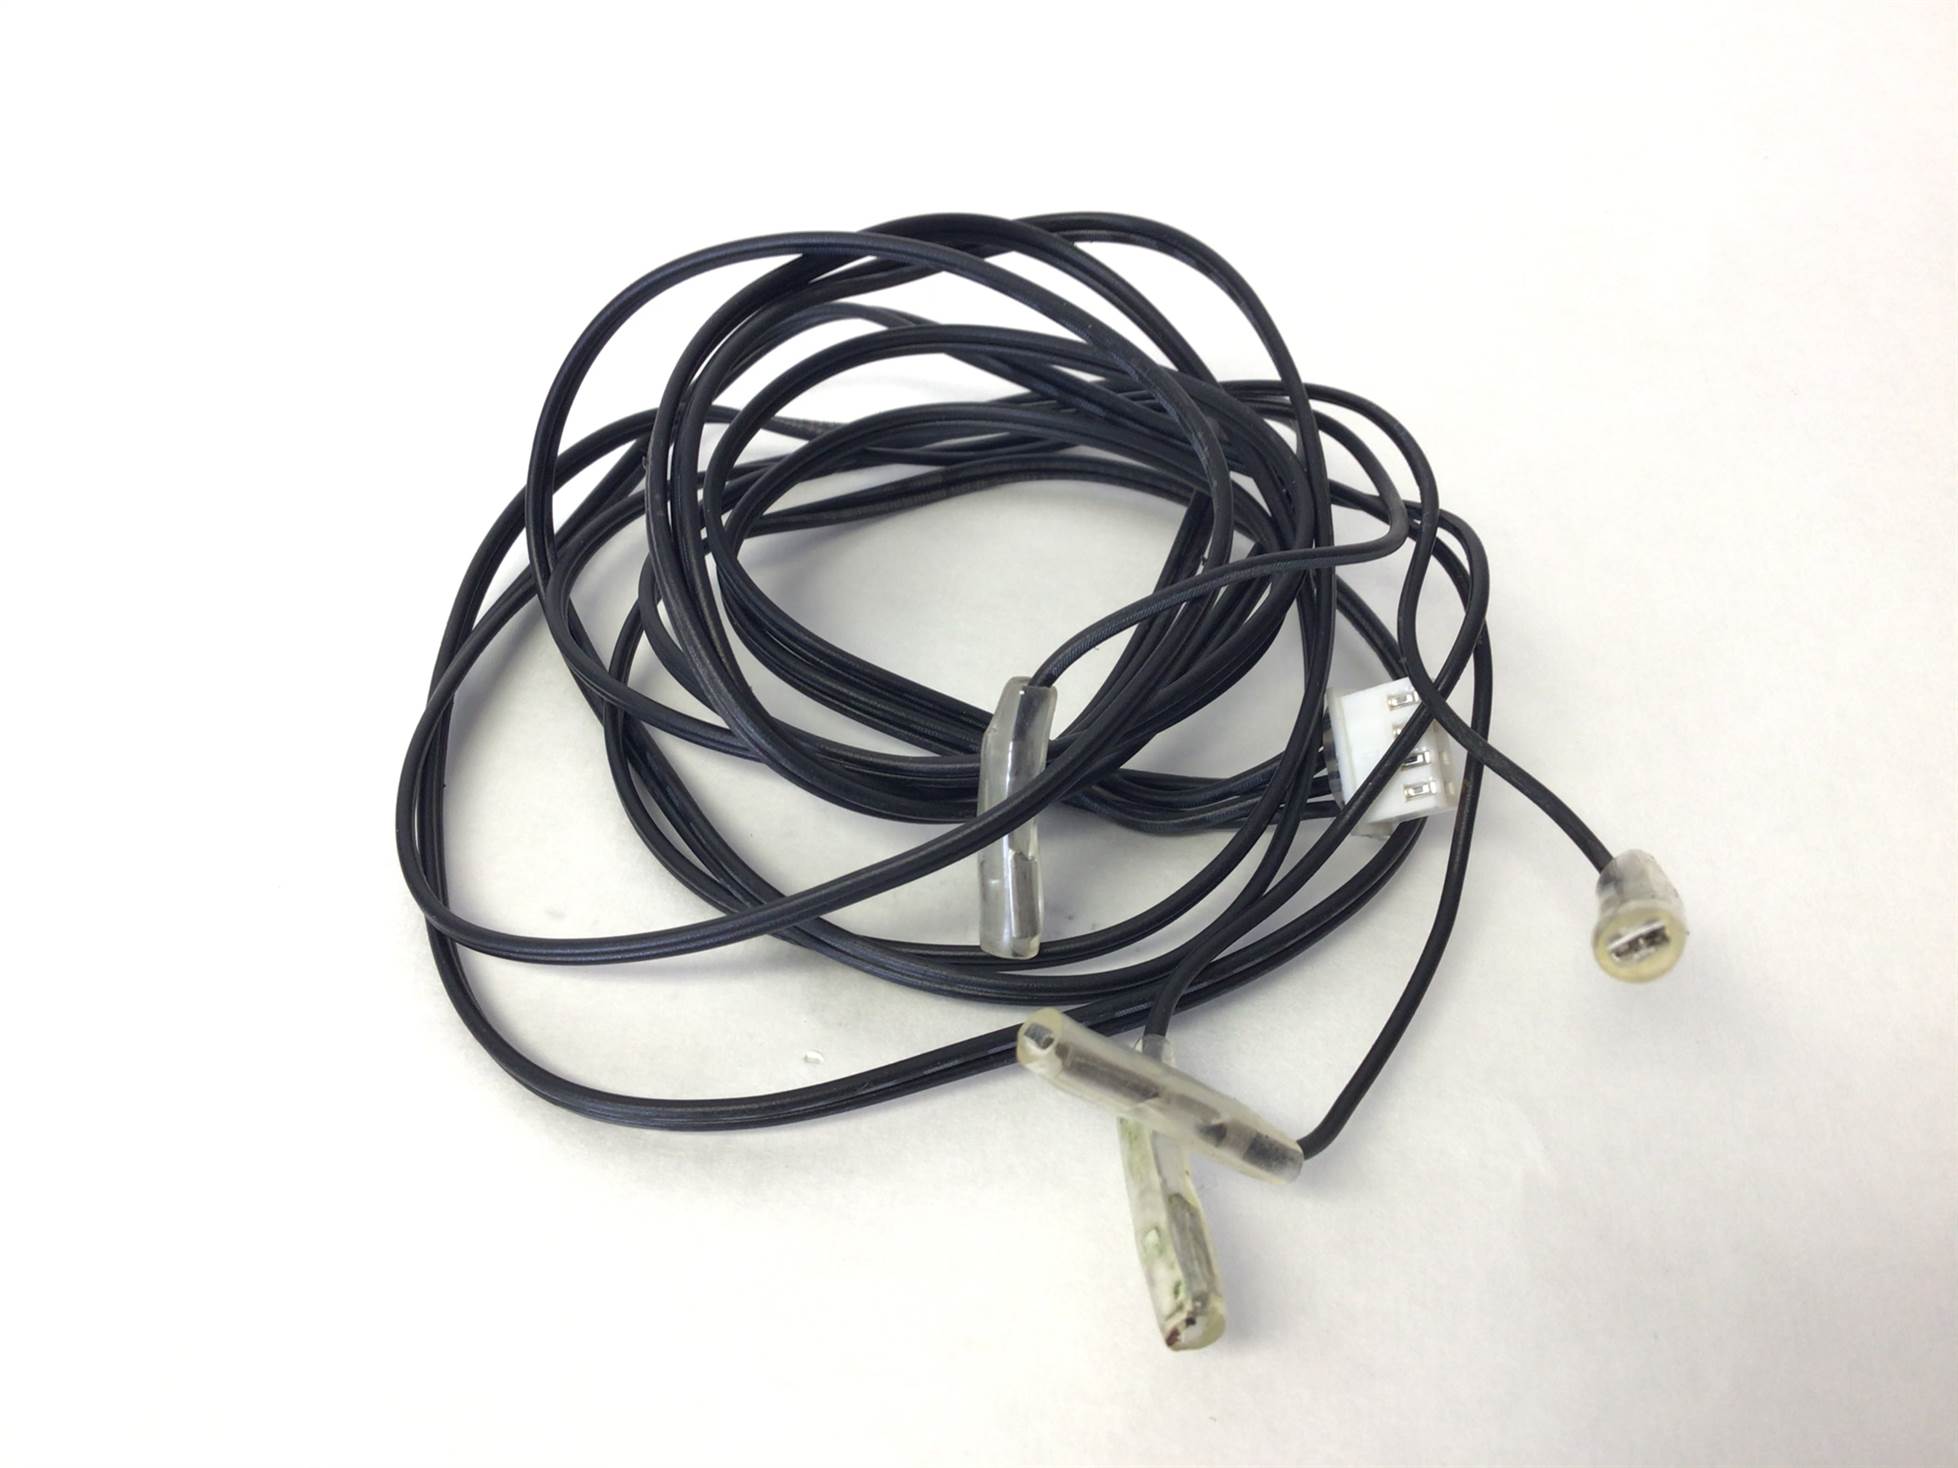 HHHR, CONNECTING CABLE